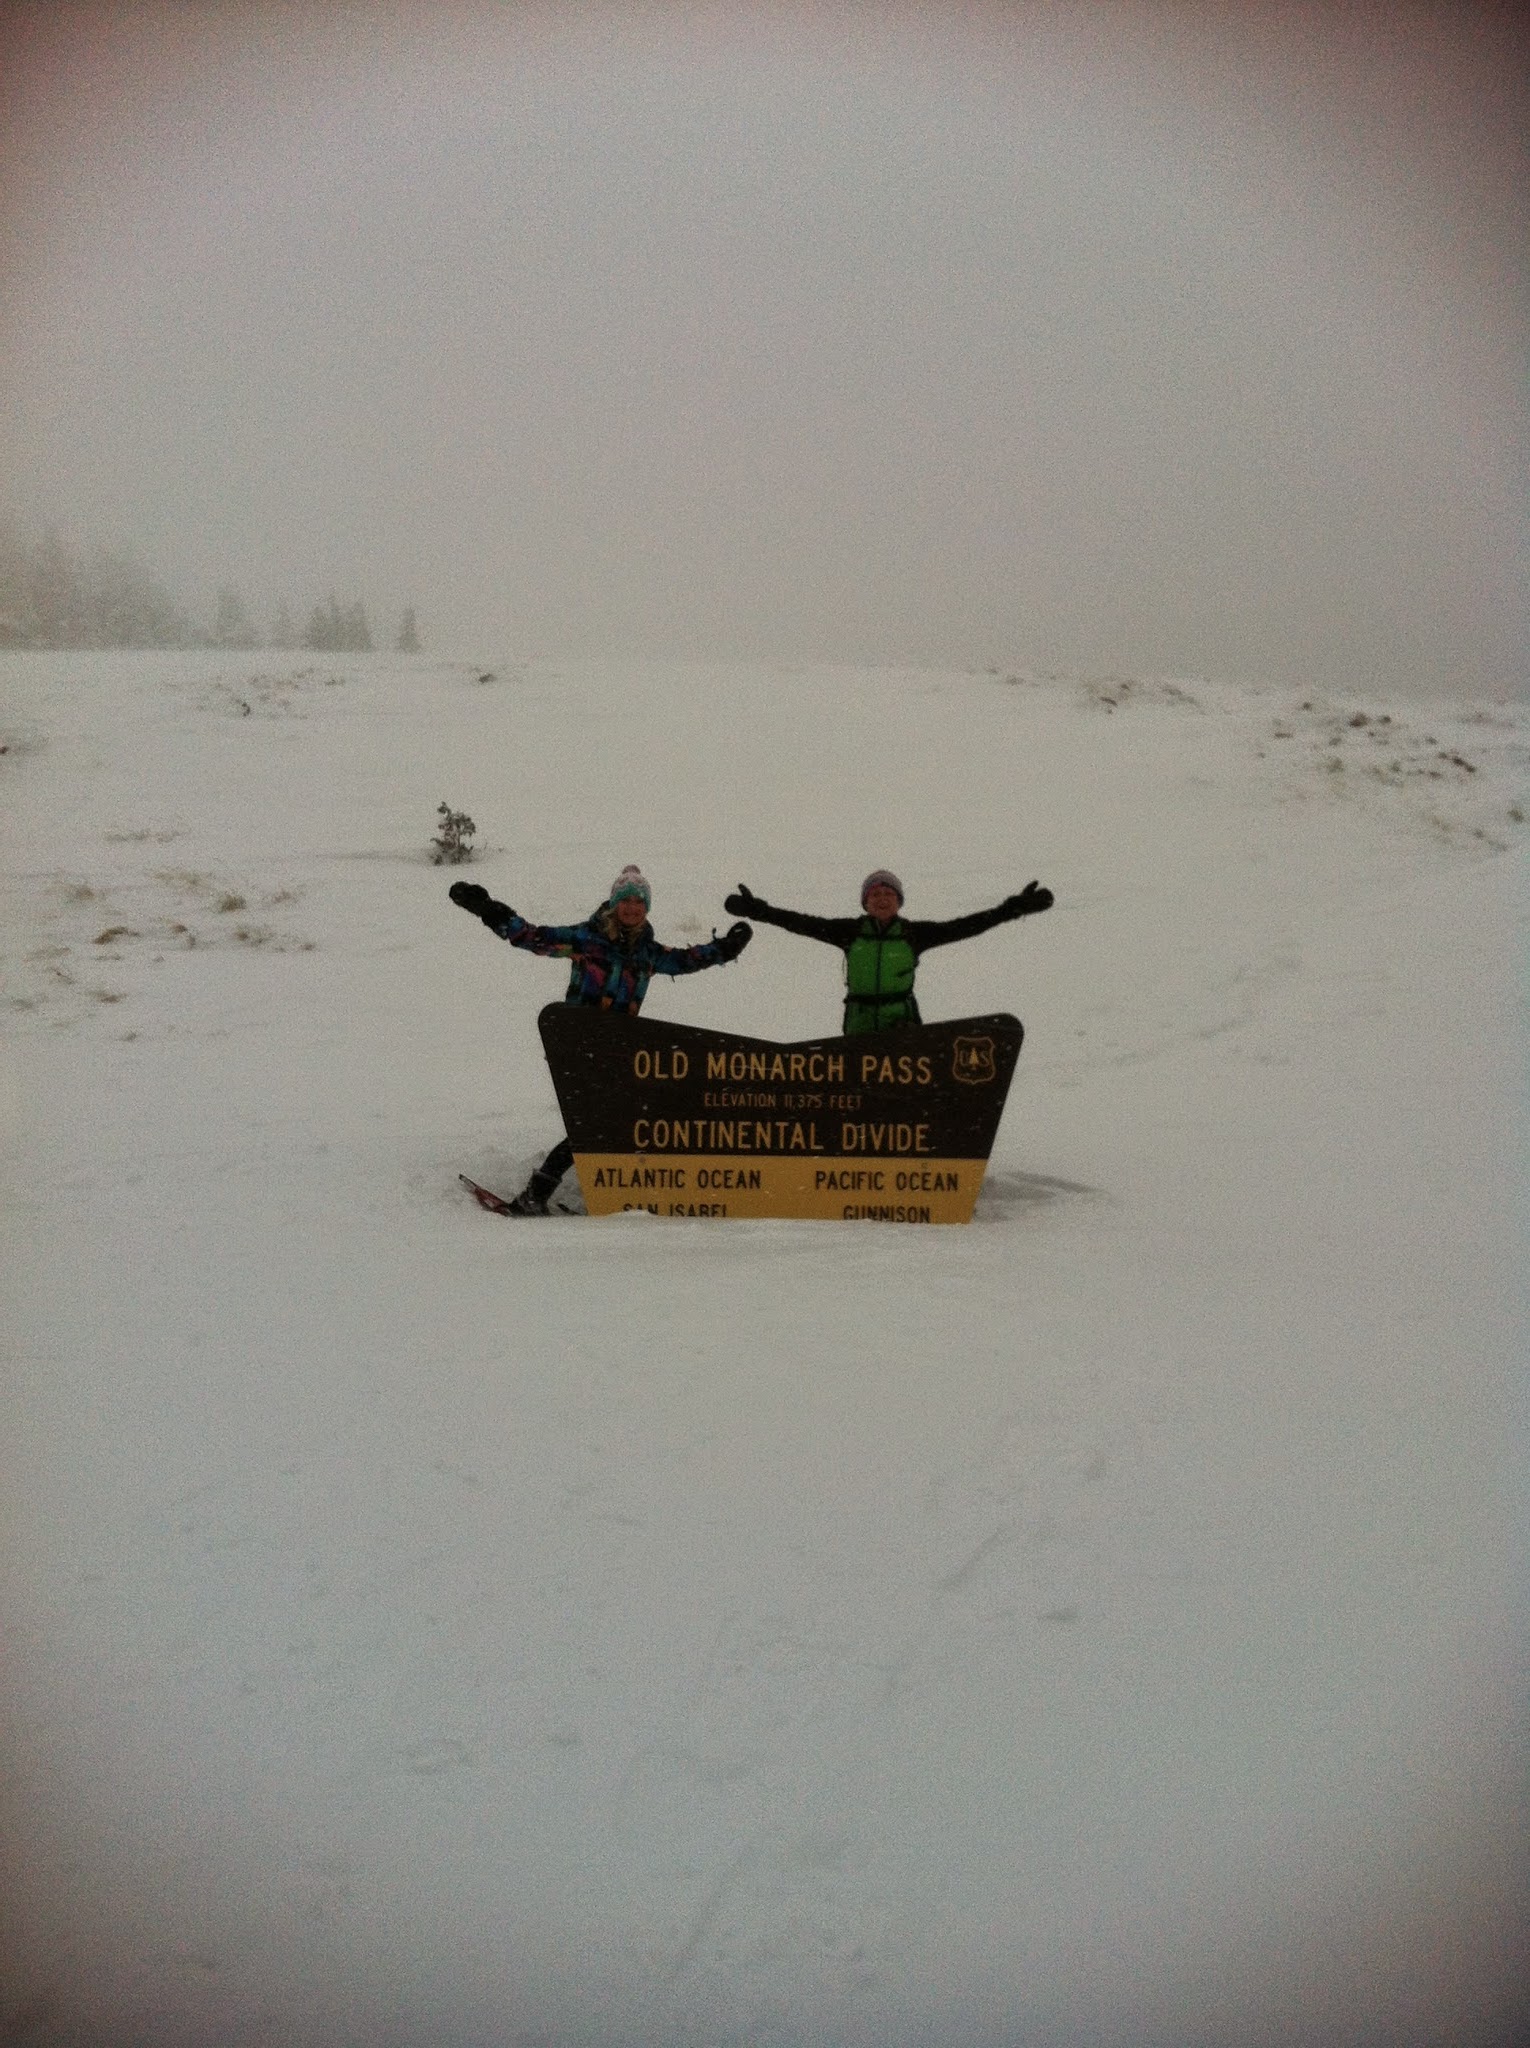 Two ladies snowshoeing at the top of Old Monarch Pass around the Continental Divide sign.